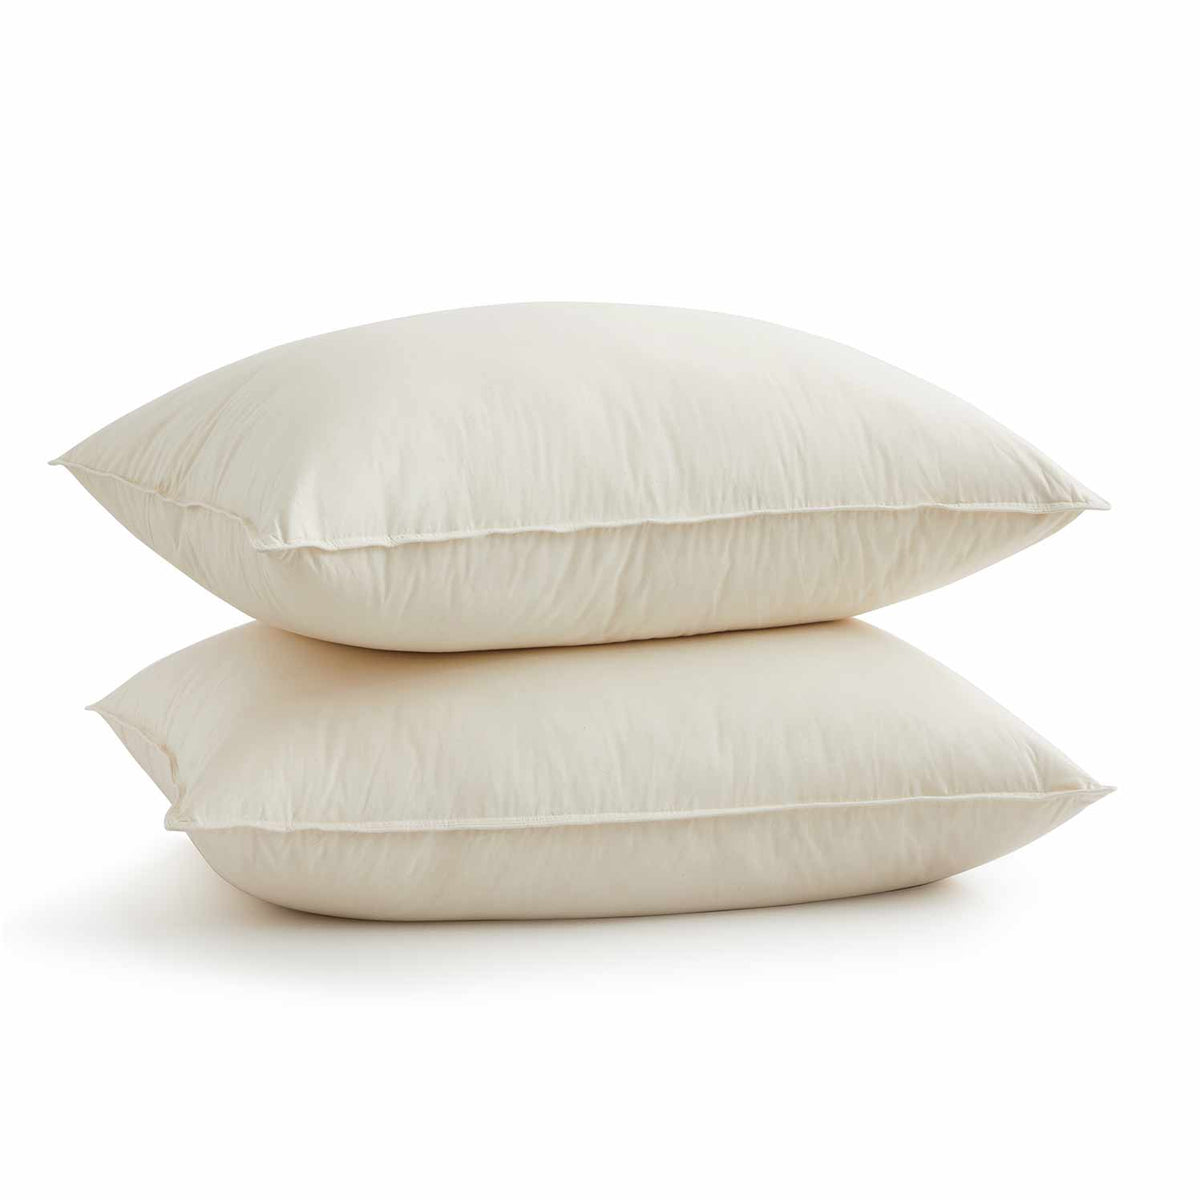 Feather and Down Pillows – Puredown